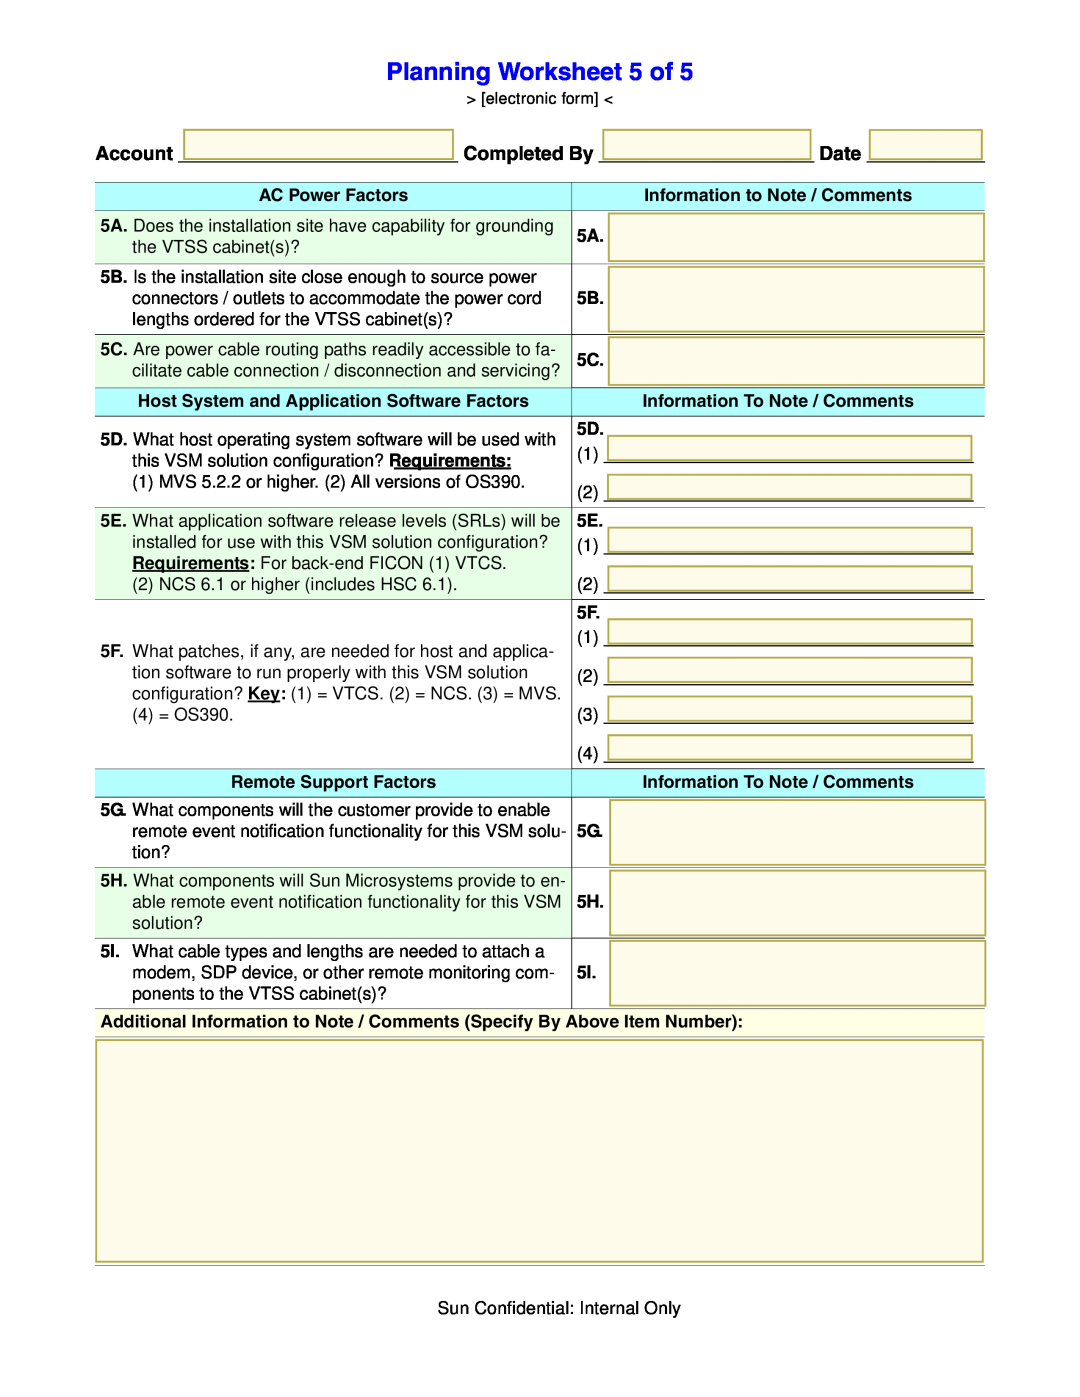 Sun Microsystems 96257 manual Planning Worksheet 5 of, Host System and Application Software Factors, Remote Support Factors 